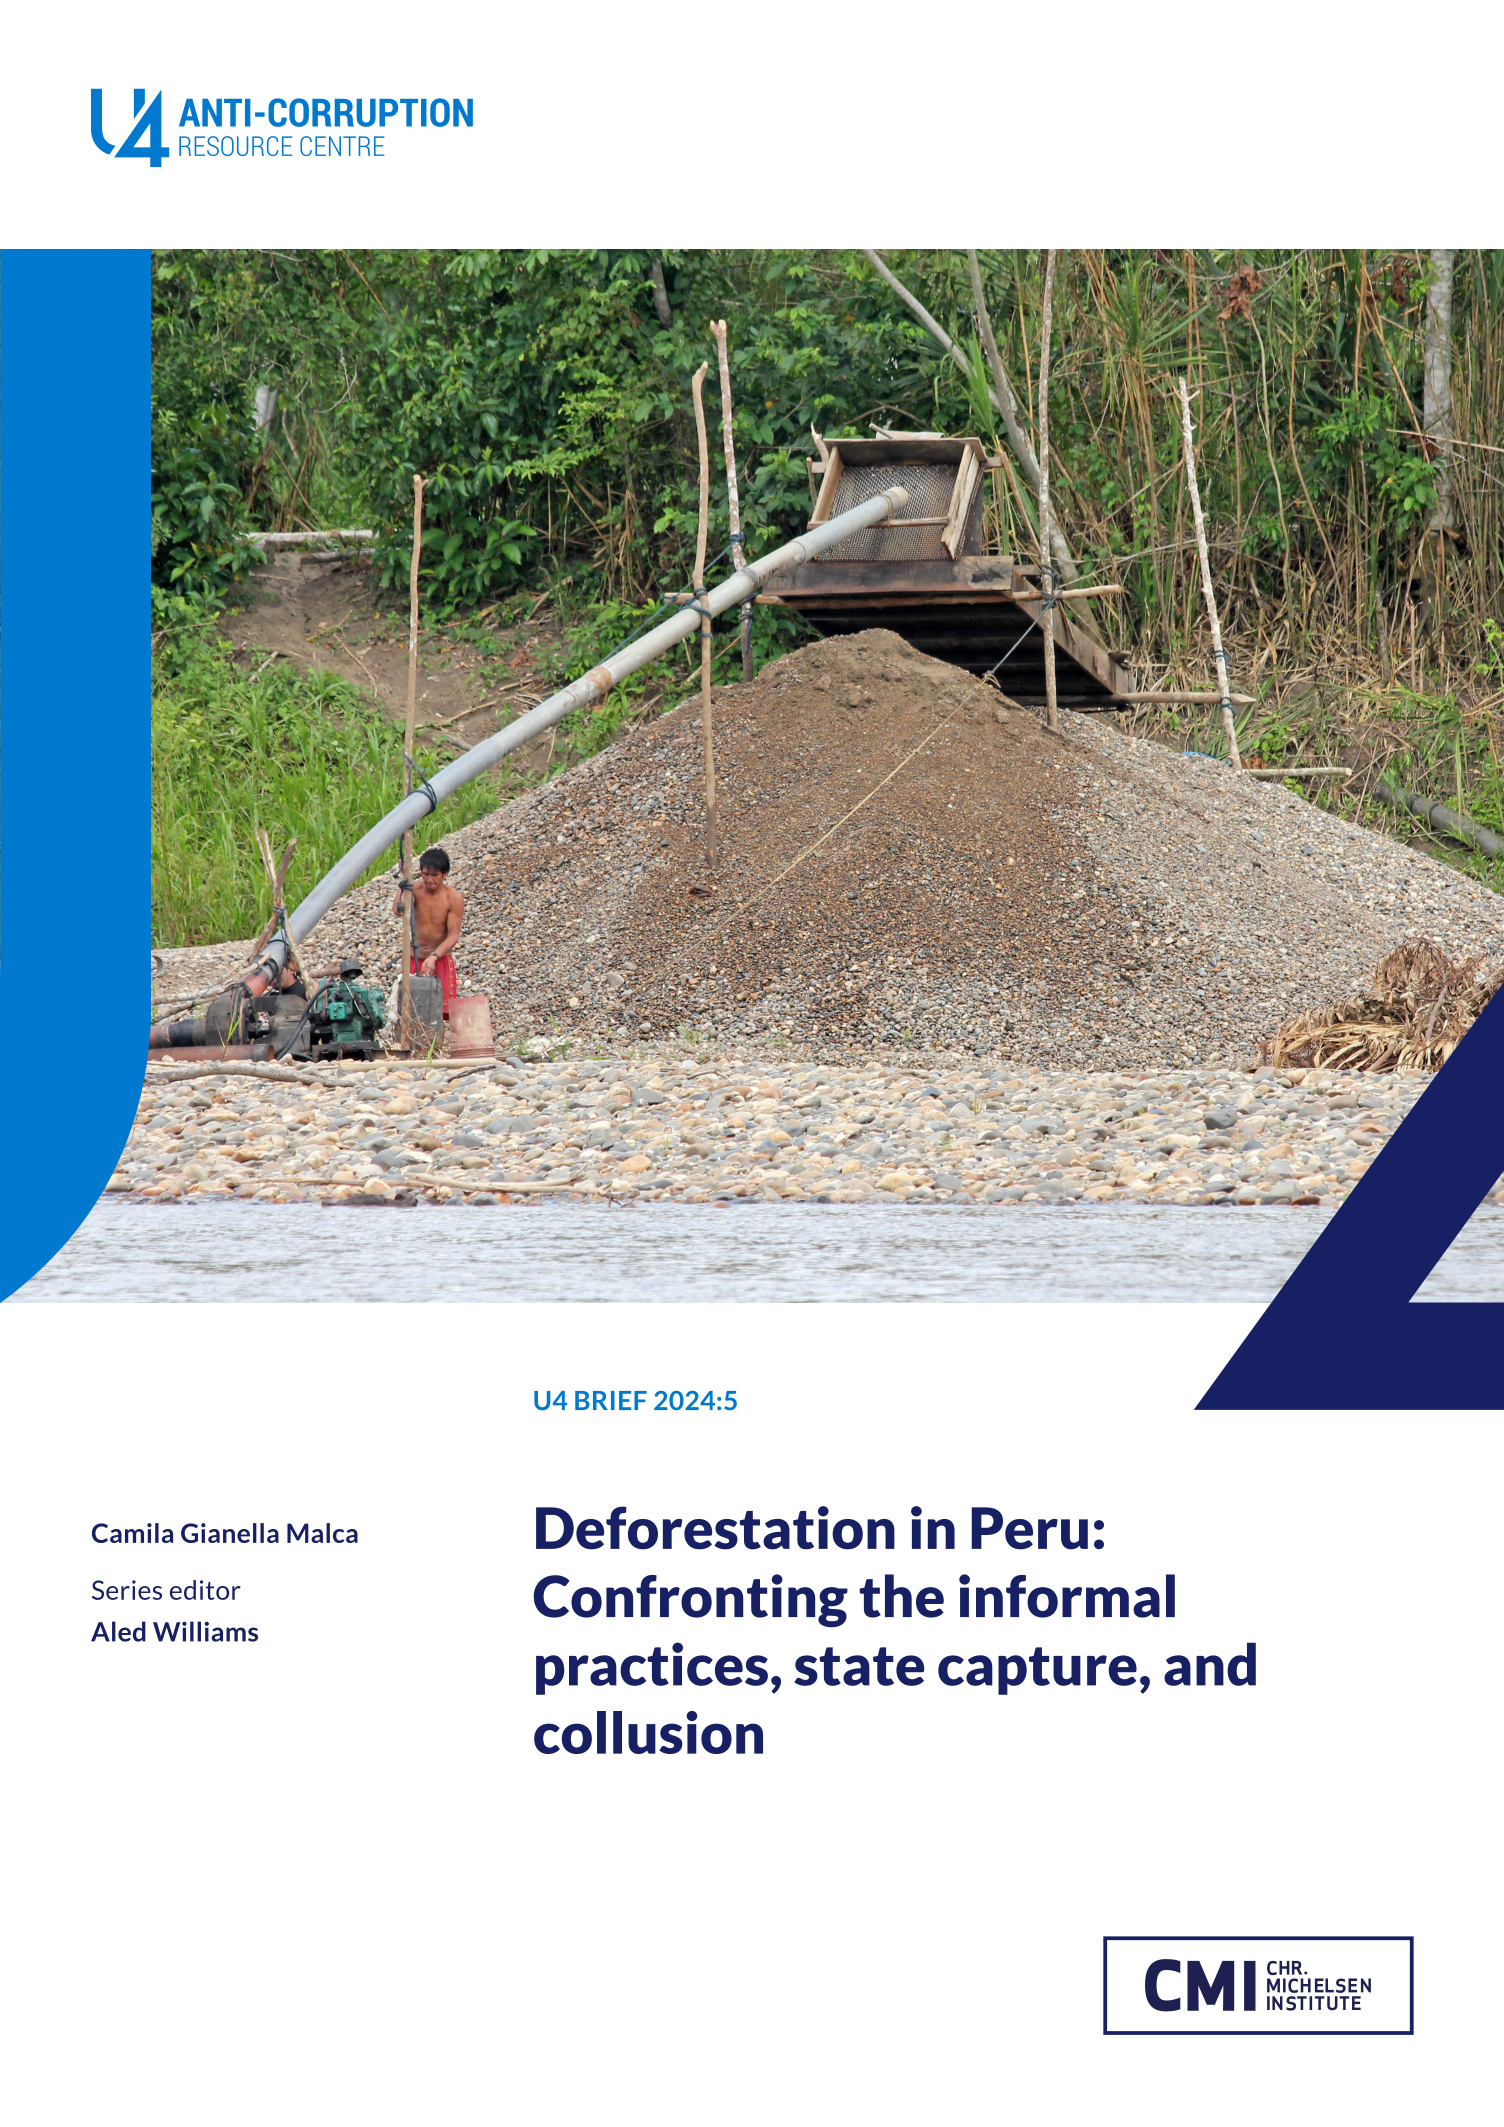 Deforestation in Peru: Confronting the informal practices, state capture, and collusion